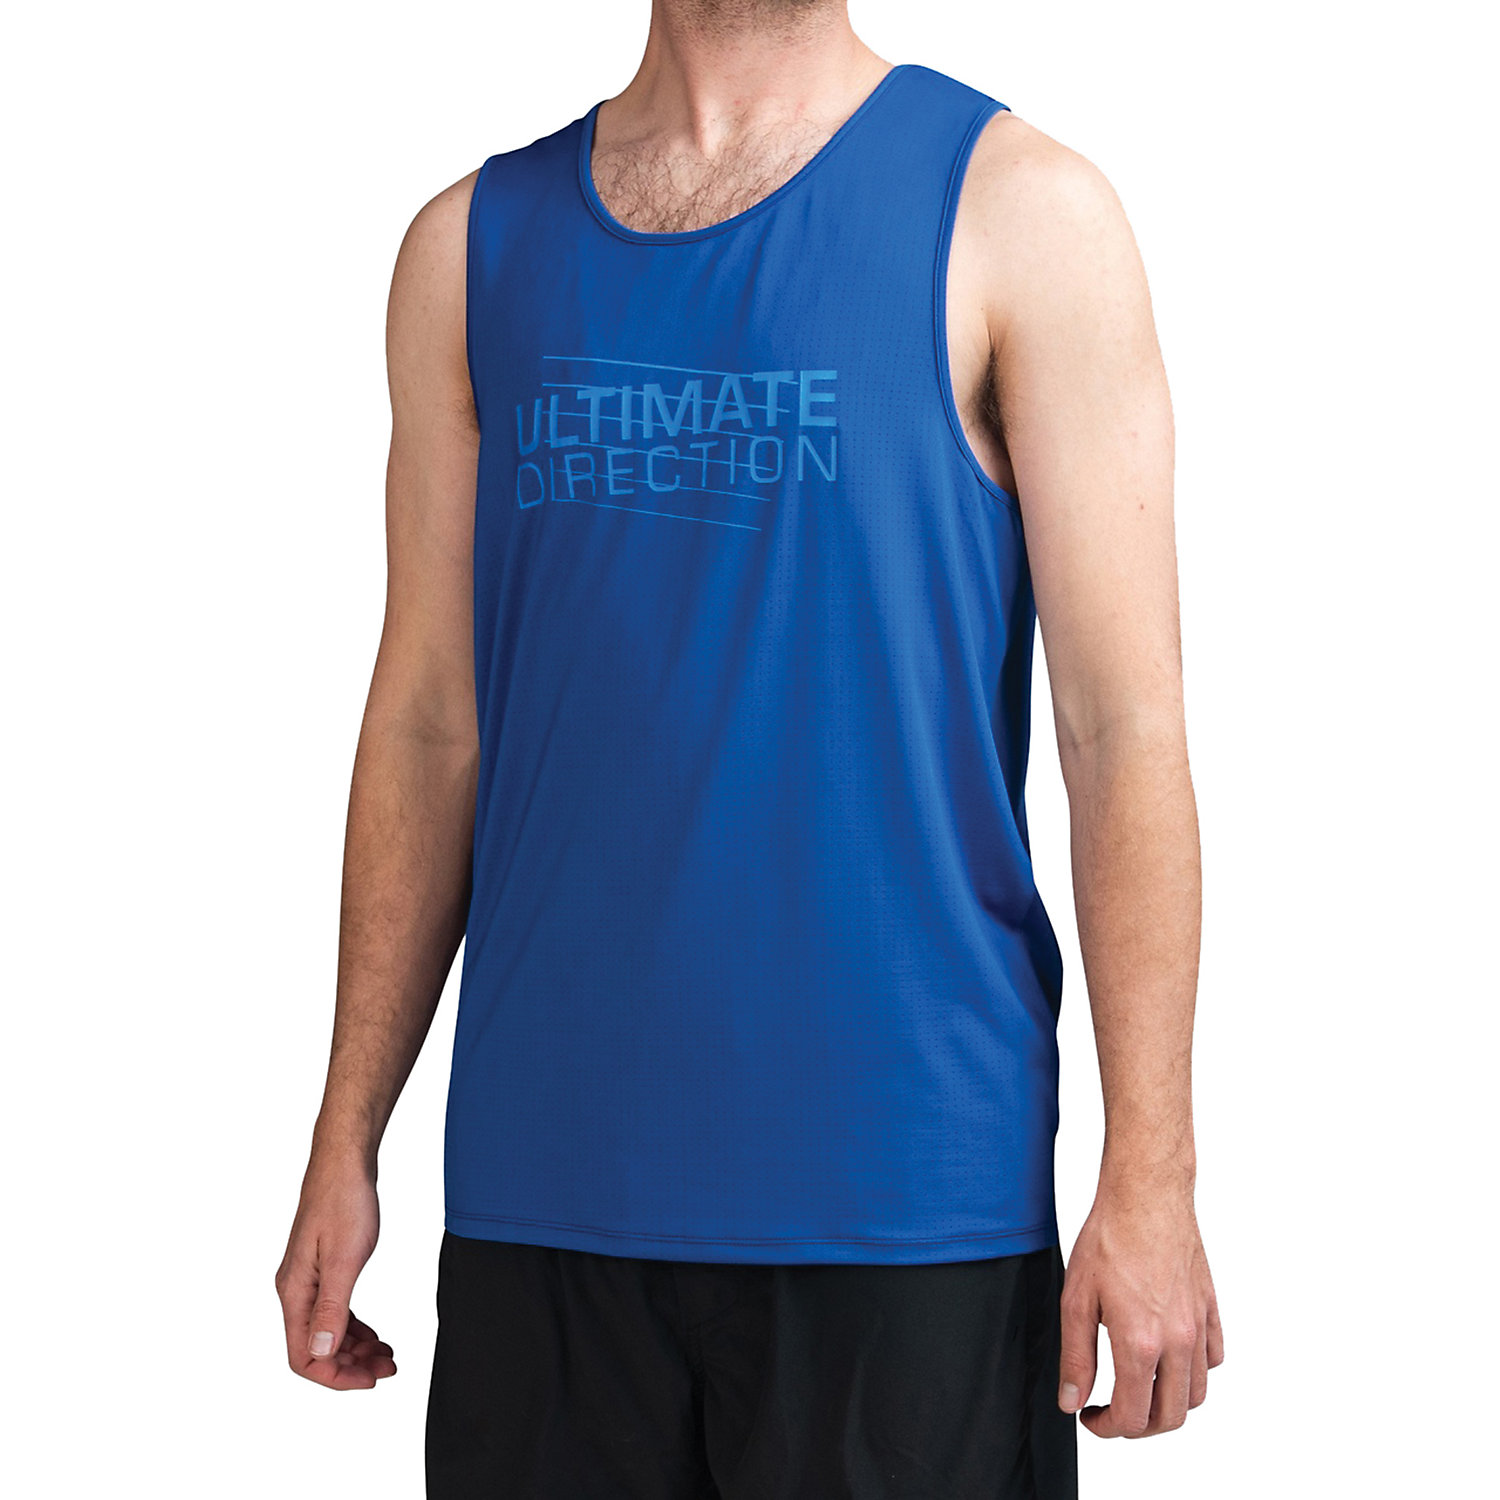 Ultimate Direction Mens Tech Tank